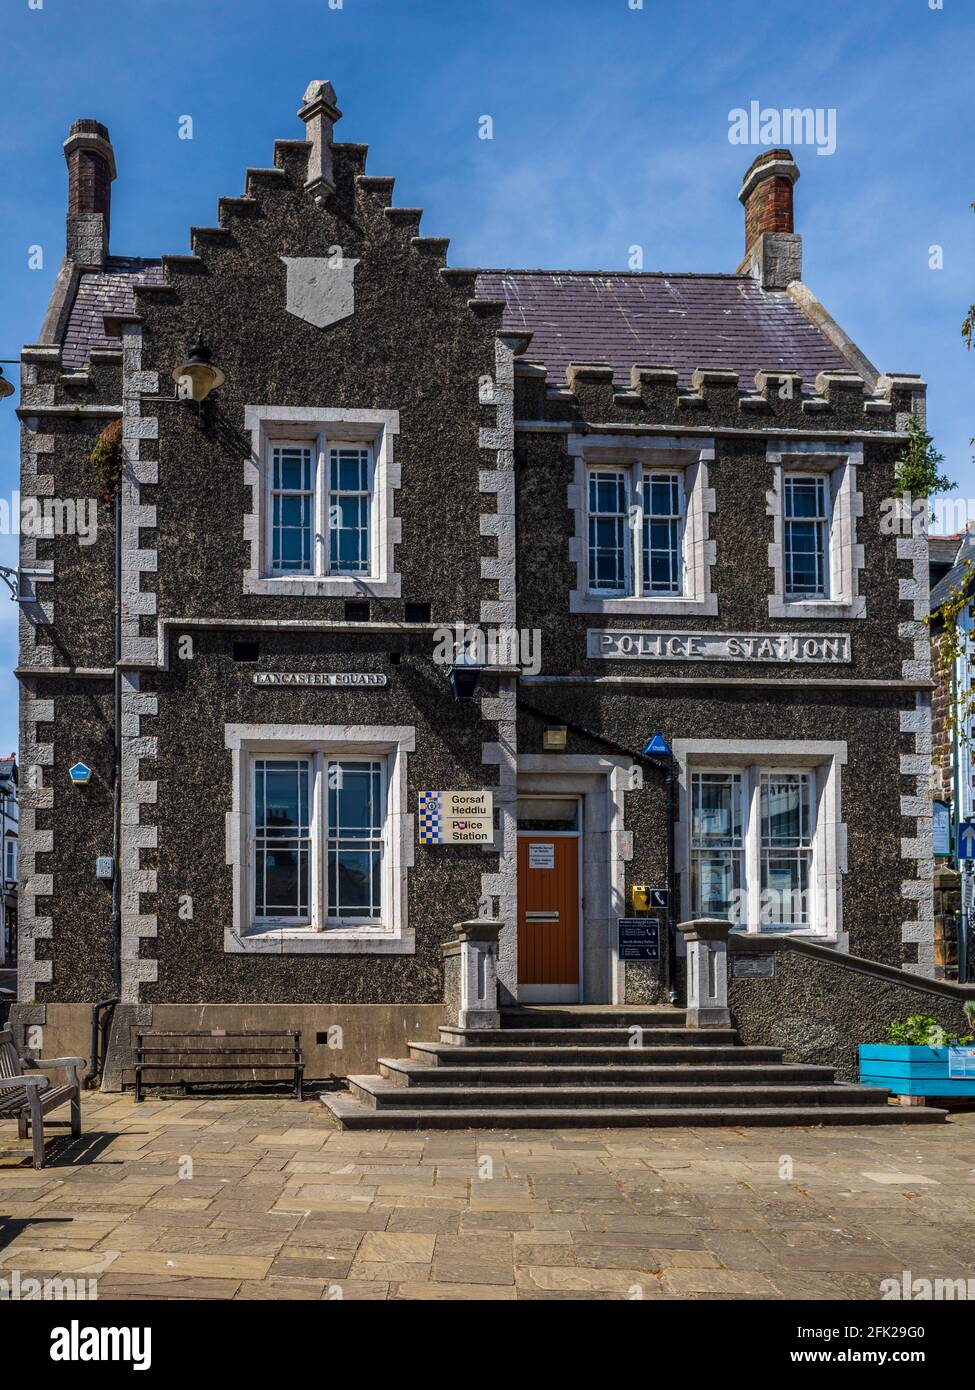 Conwy Police Station on Lancaster Square, Conwy, North Wales. Dating from the 1860s, Grade II listed. Stock Photo